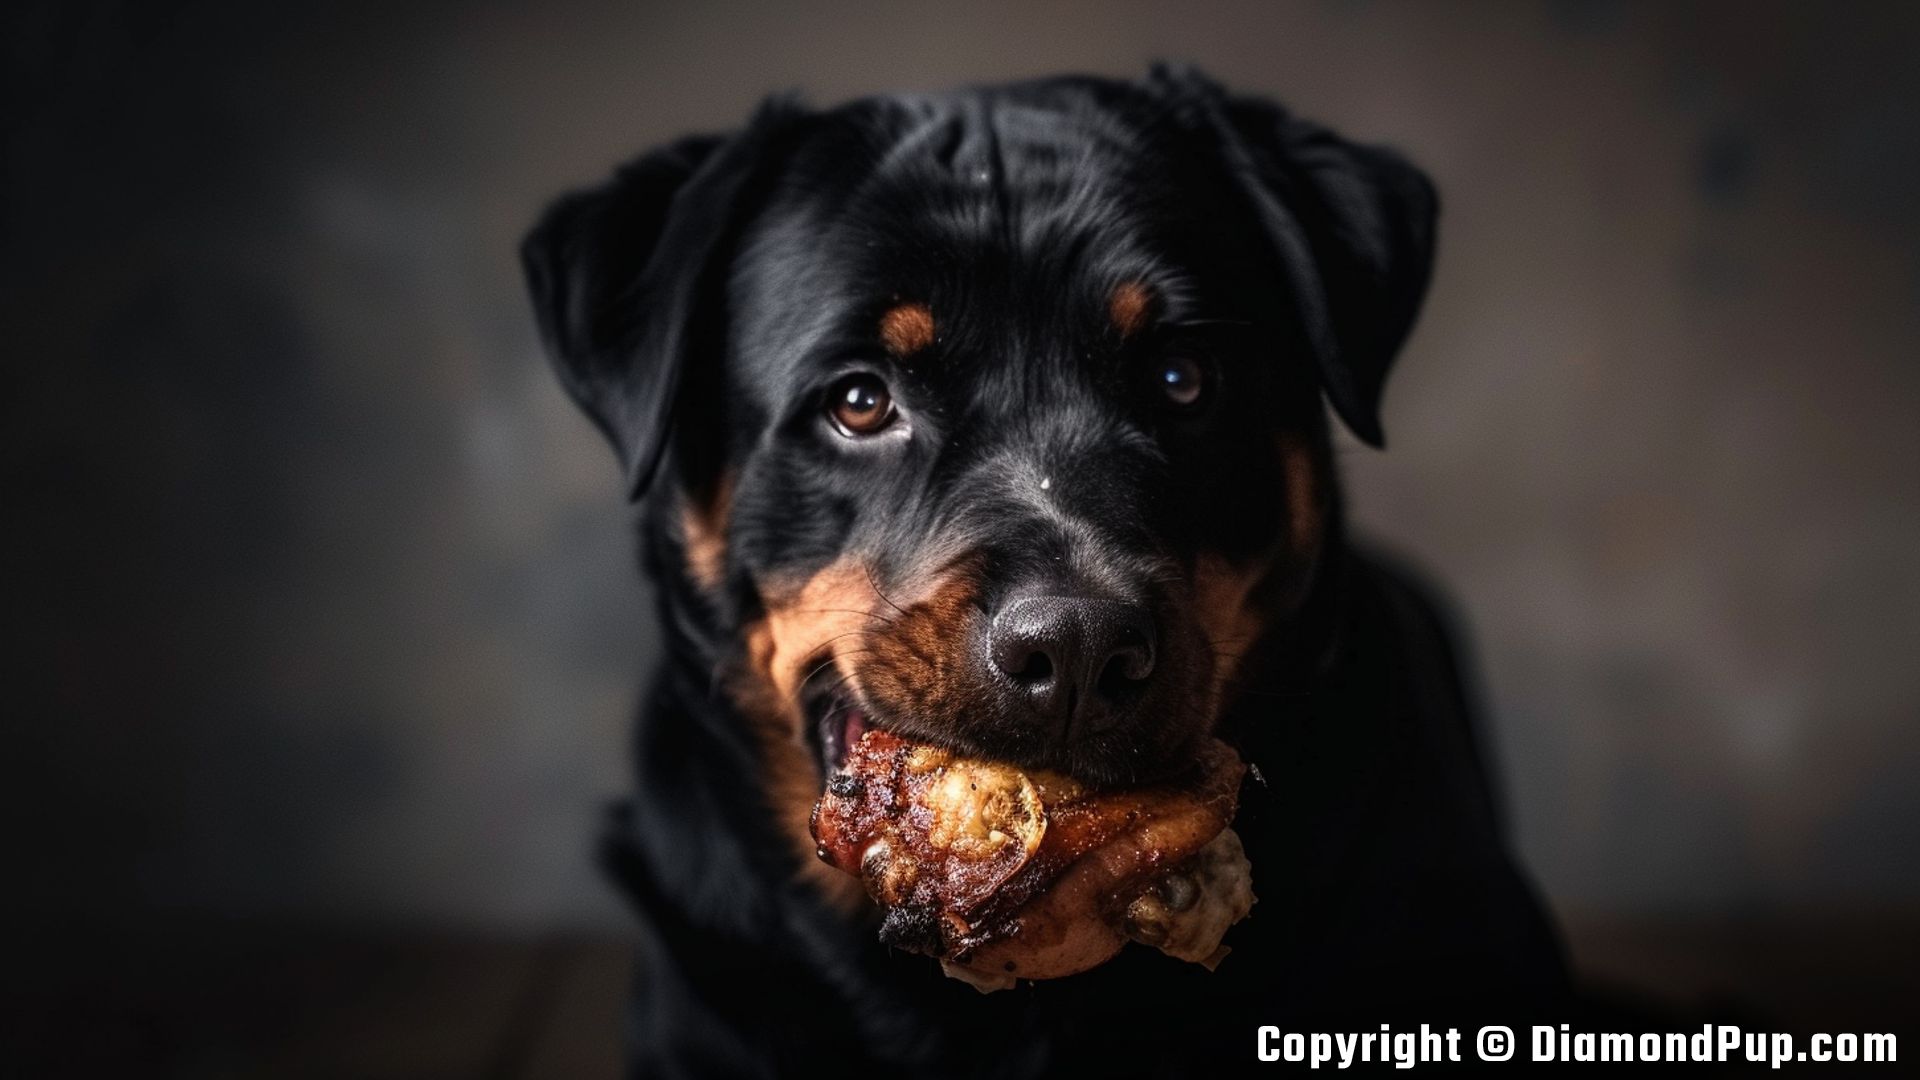 Image of an Adorable Rottweiler Eating Chicken